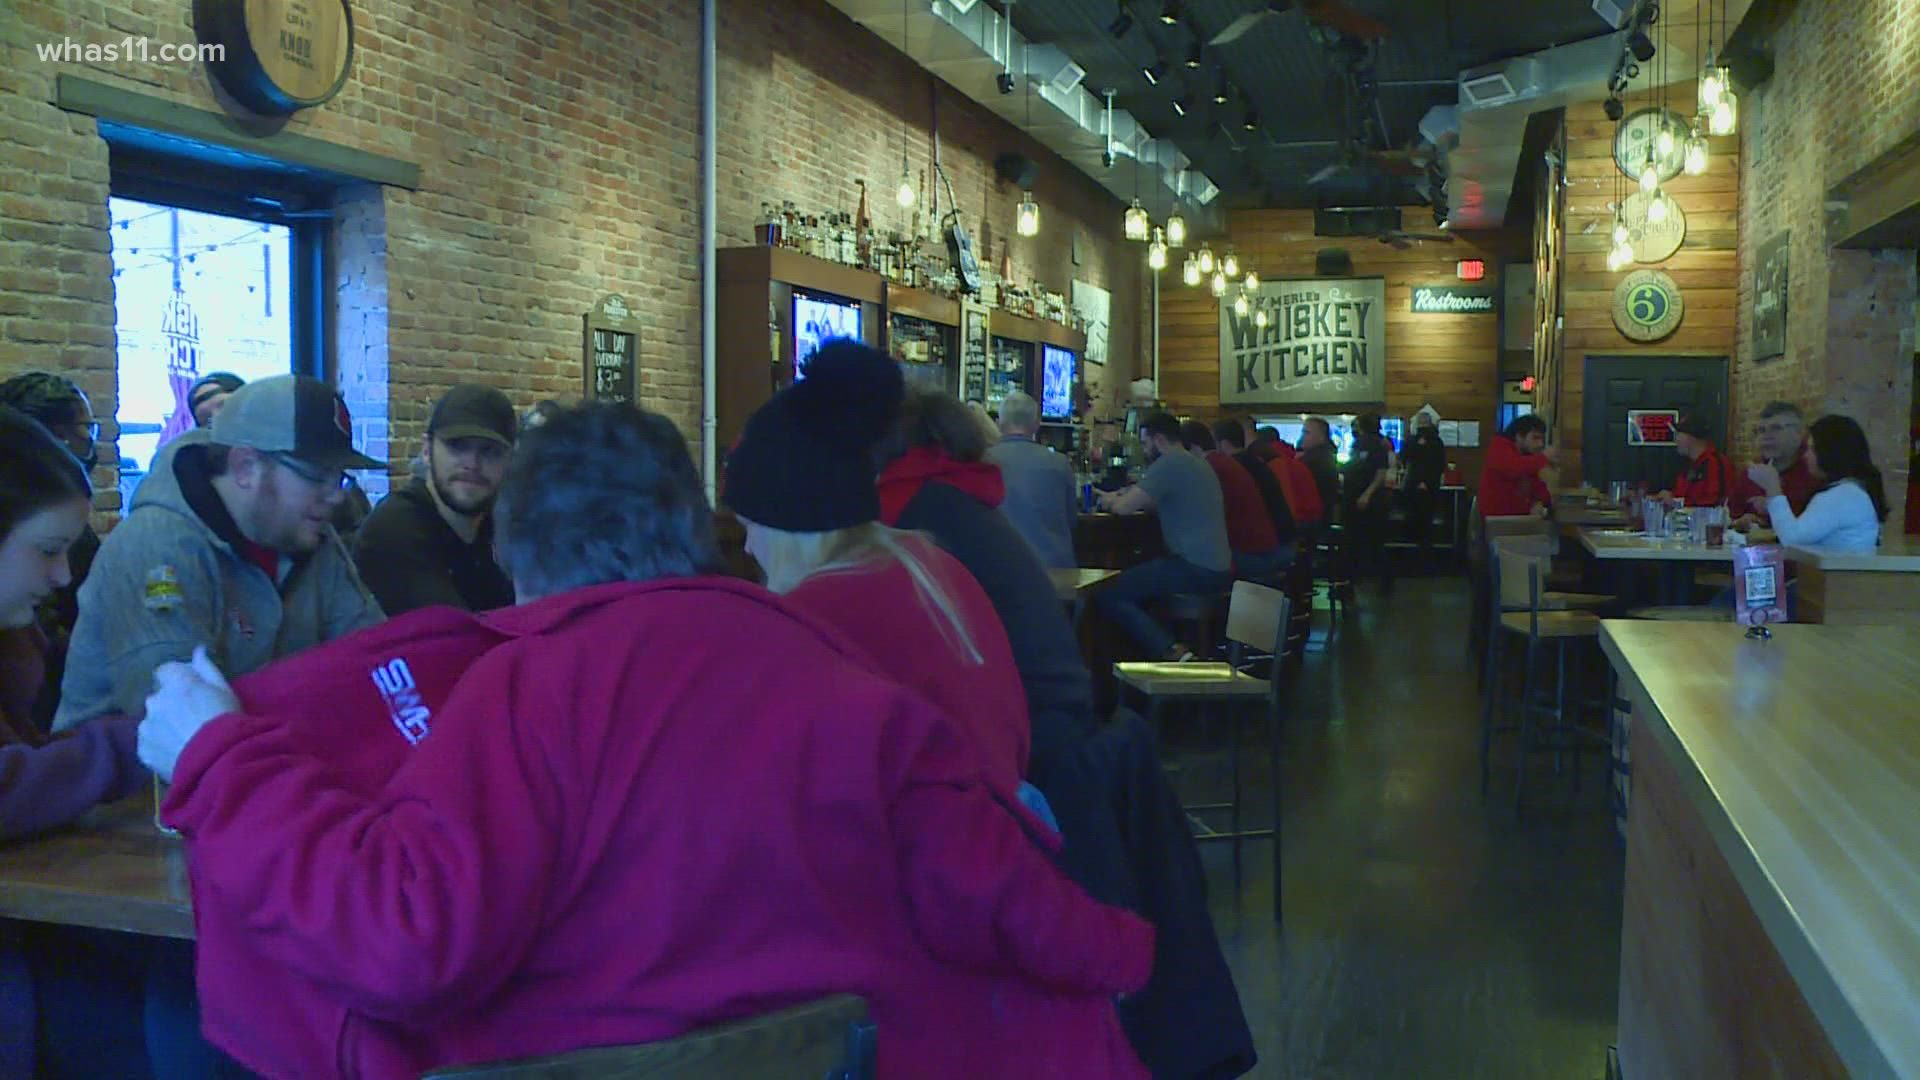 Louisville Downtown Partnership said more than three times the number of businesses that have closed last year have opened.